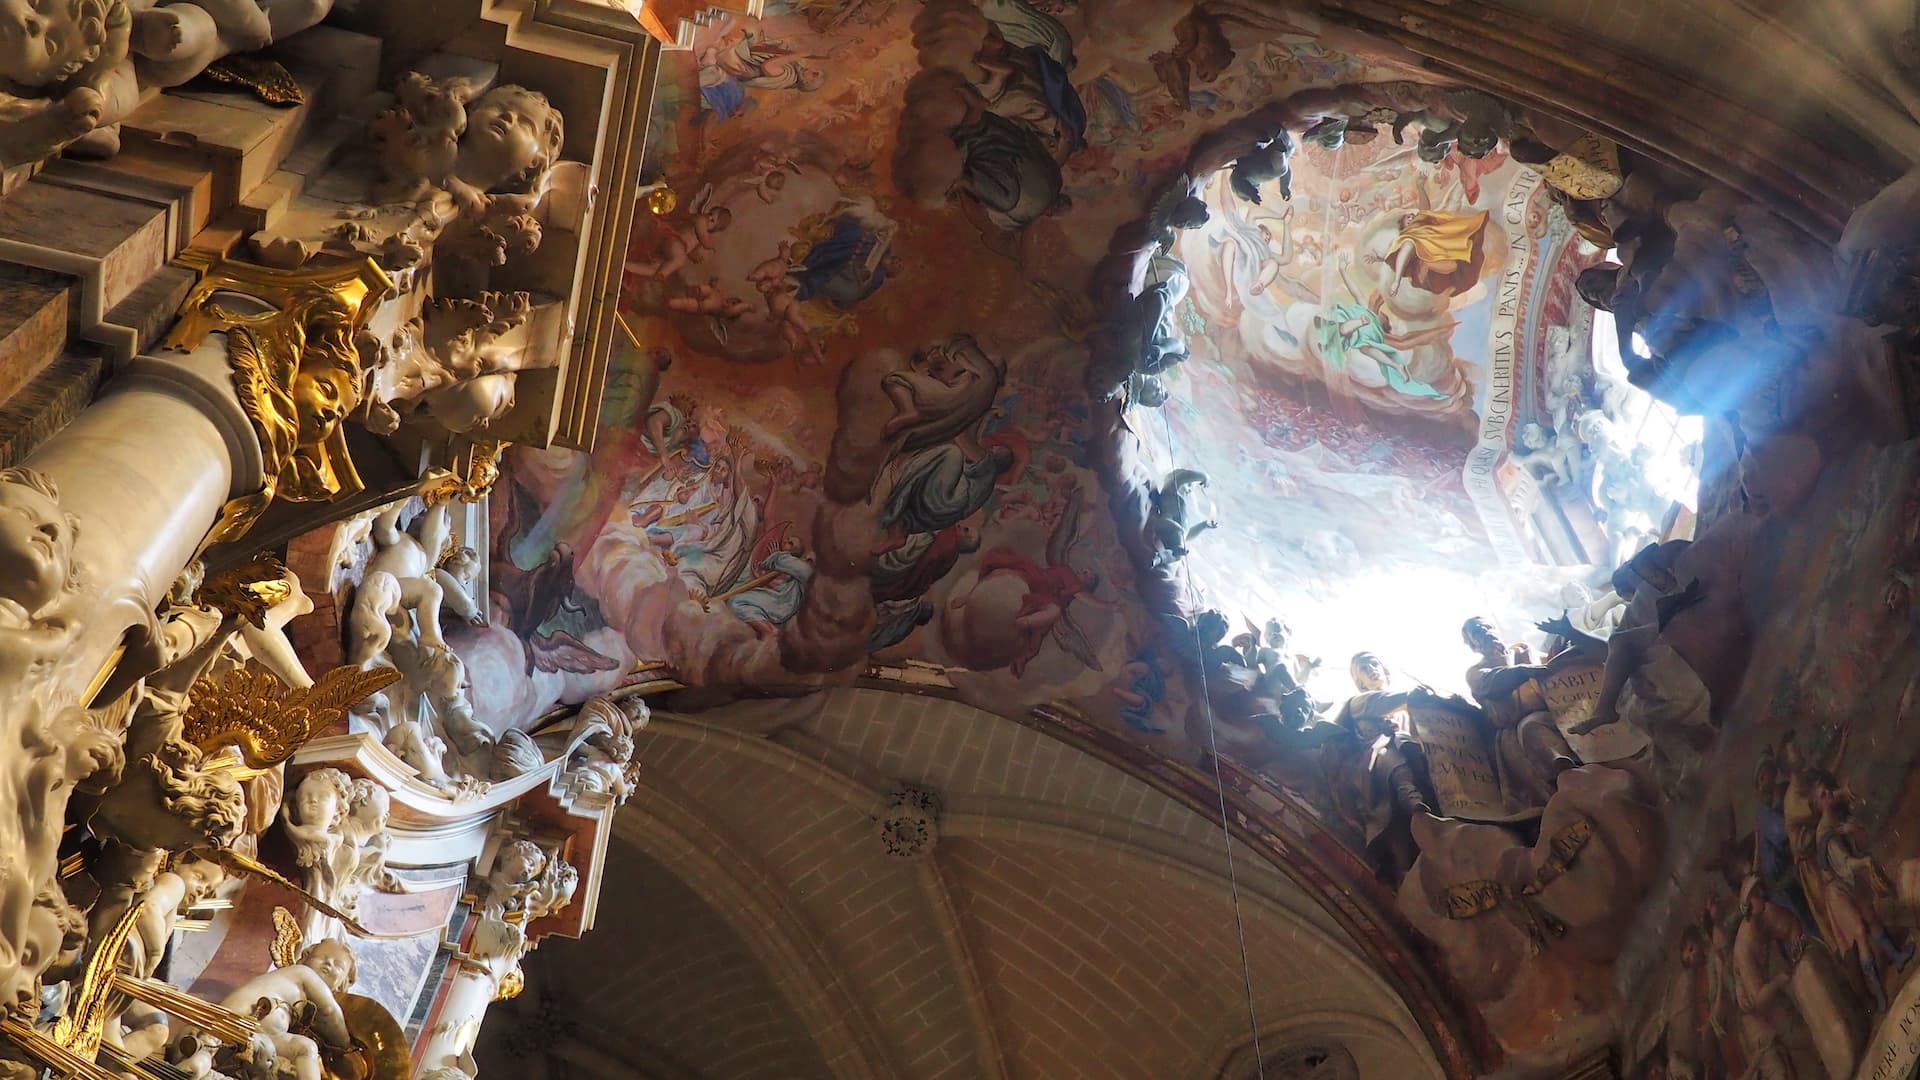 A ceiling fresco painting is illuminated by light shining through a dome above